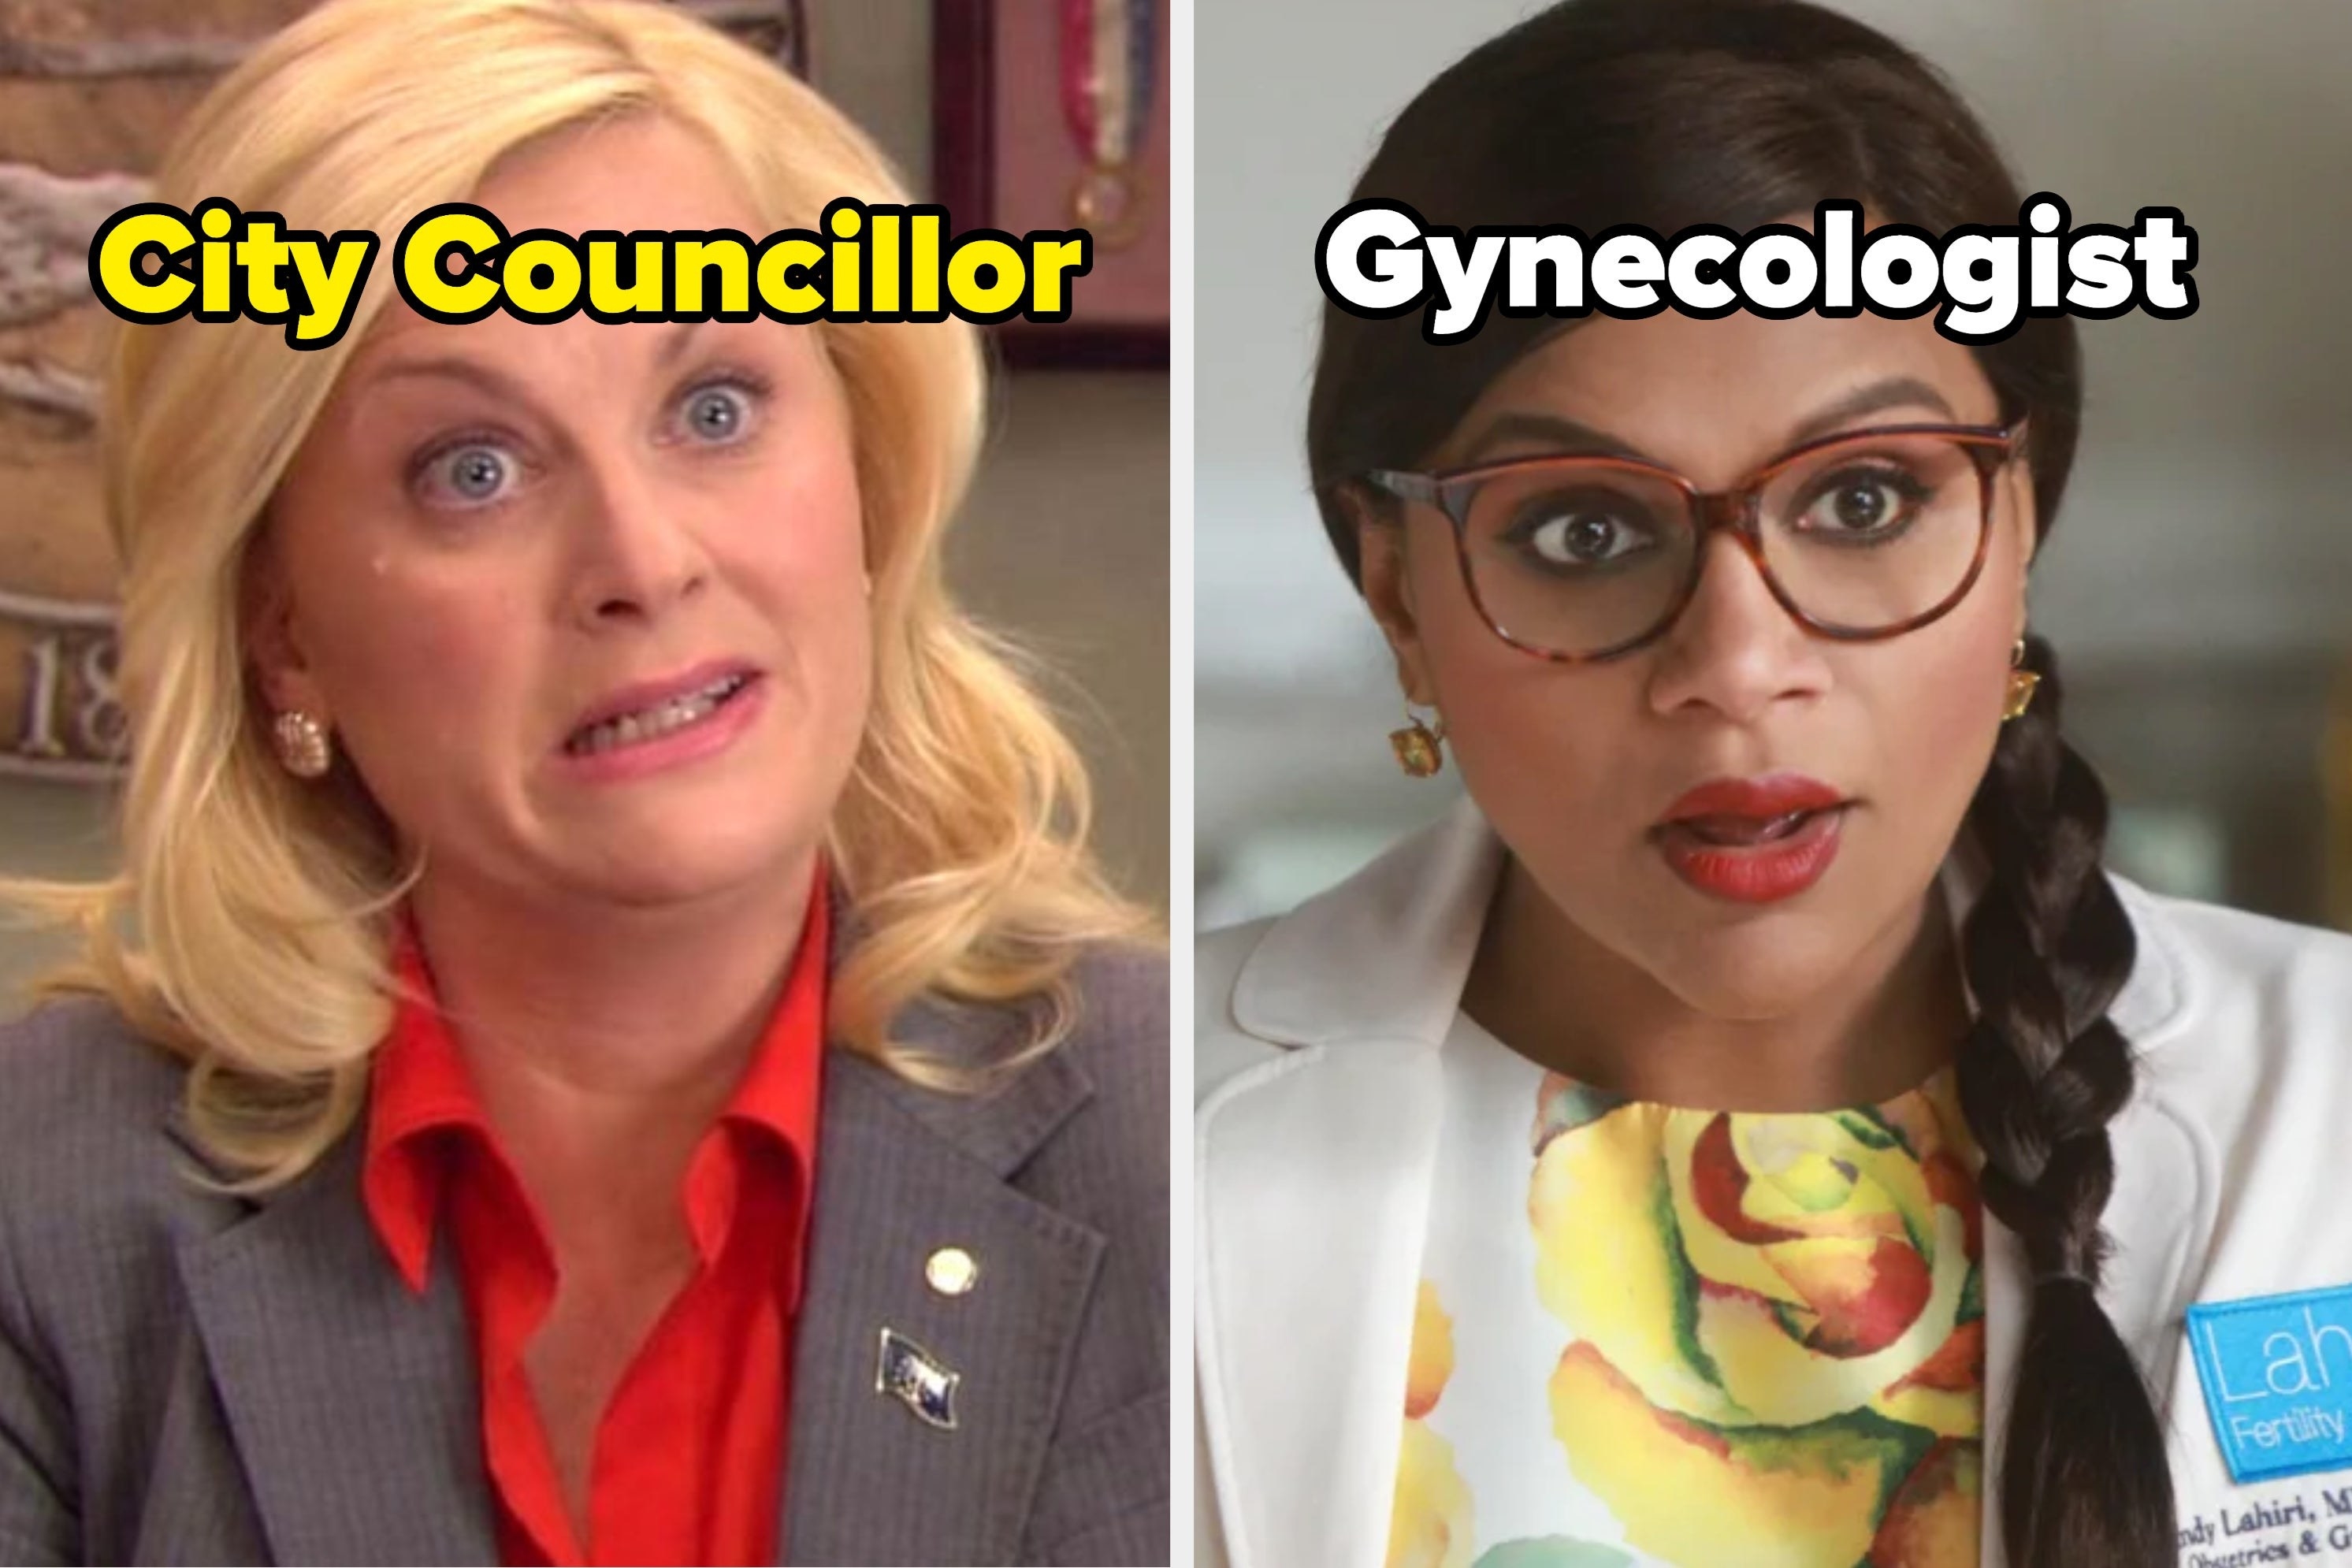 Leslie from &quot;Parks and Recreation&quot; with the words &quot;City Councillor&quot; and Mindy from &quot;The Mindy Project&quot; with the word &quot;Gynecologist&quot; 